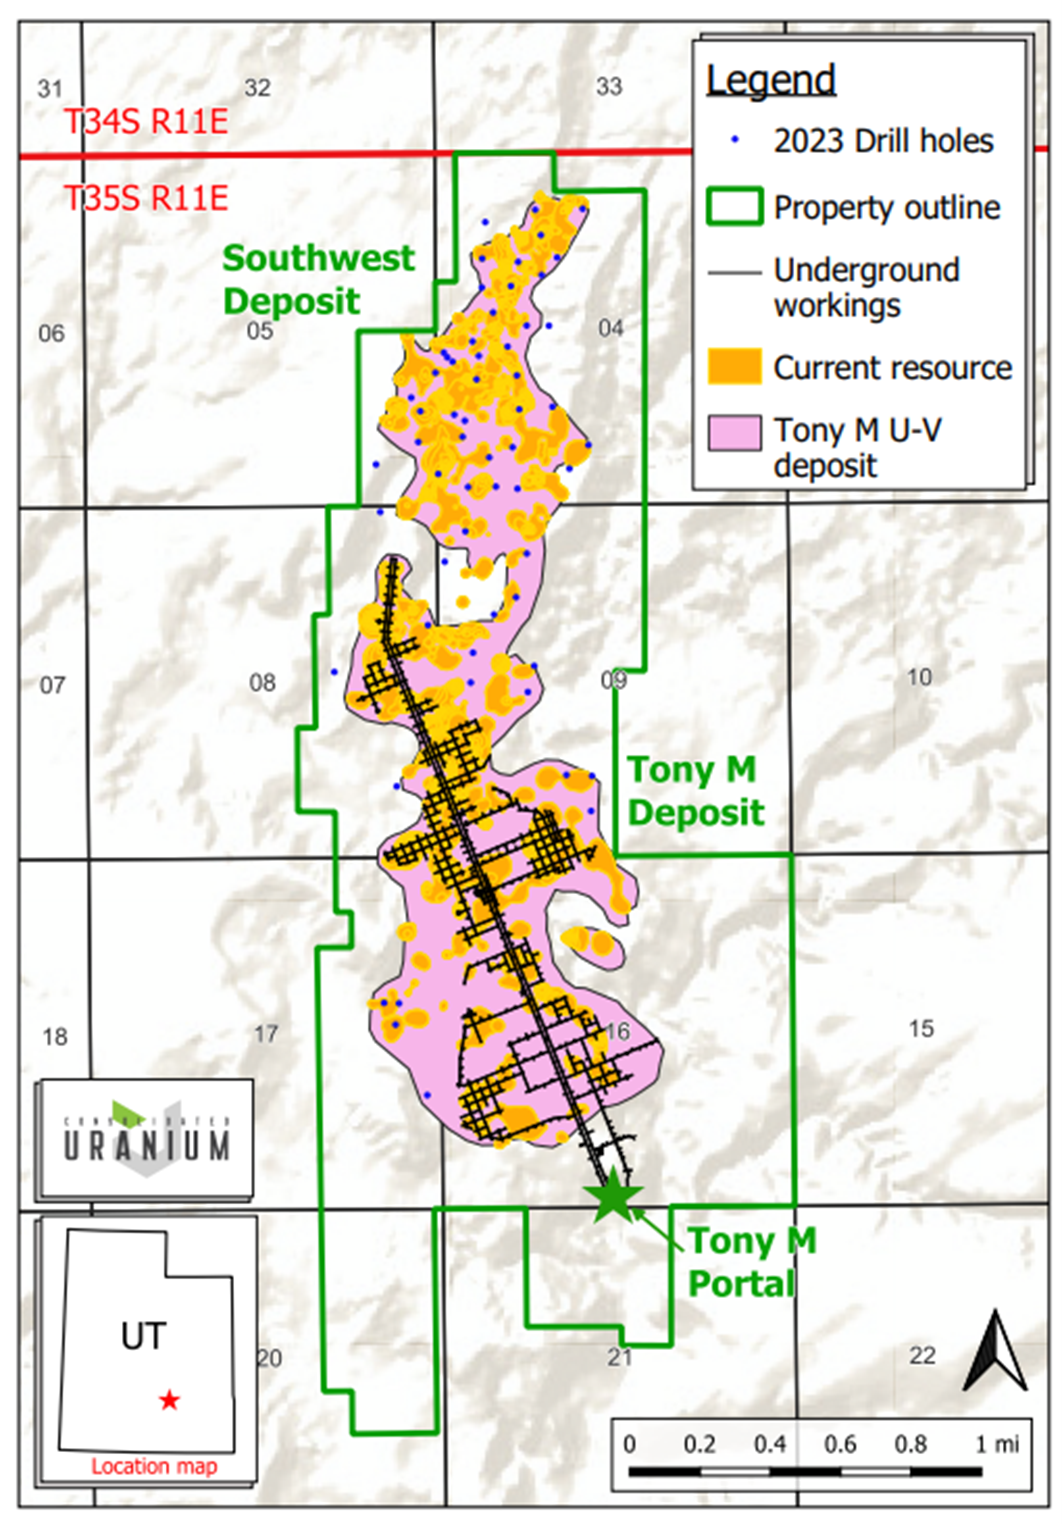 Map of Tony M Mine outlining underground workings and planned drill locations for 2023 work